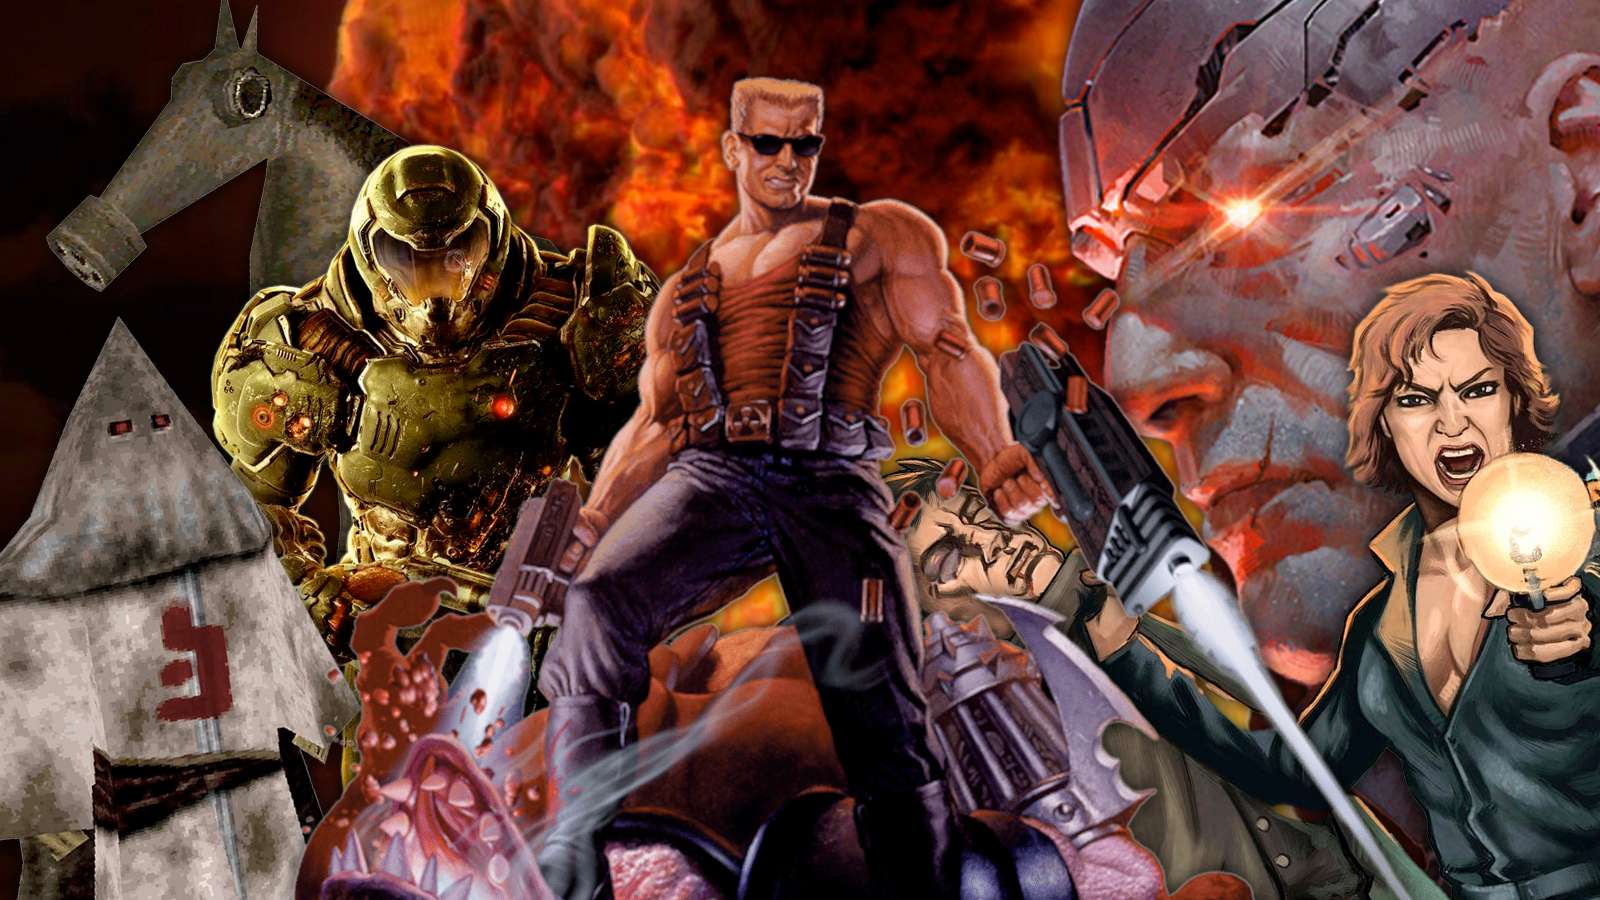 boomer shooters represented by duke nukem at the front, turbo overkill at the back, rise of the triad in the right hand corner, behind duke is doom guy and behind that is the gas mask horse from hrot. below is a cultist from dusk. an explosion is going off in the background